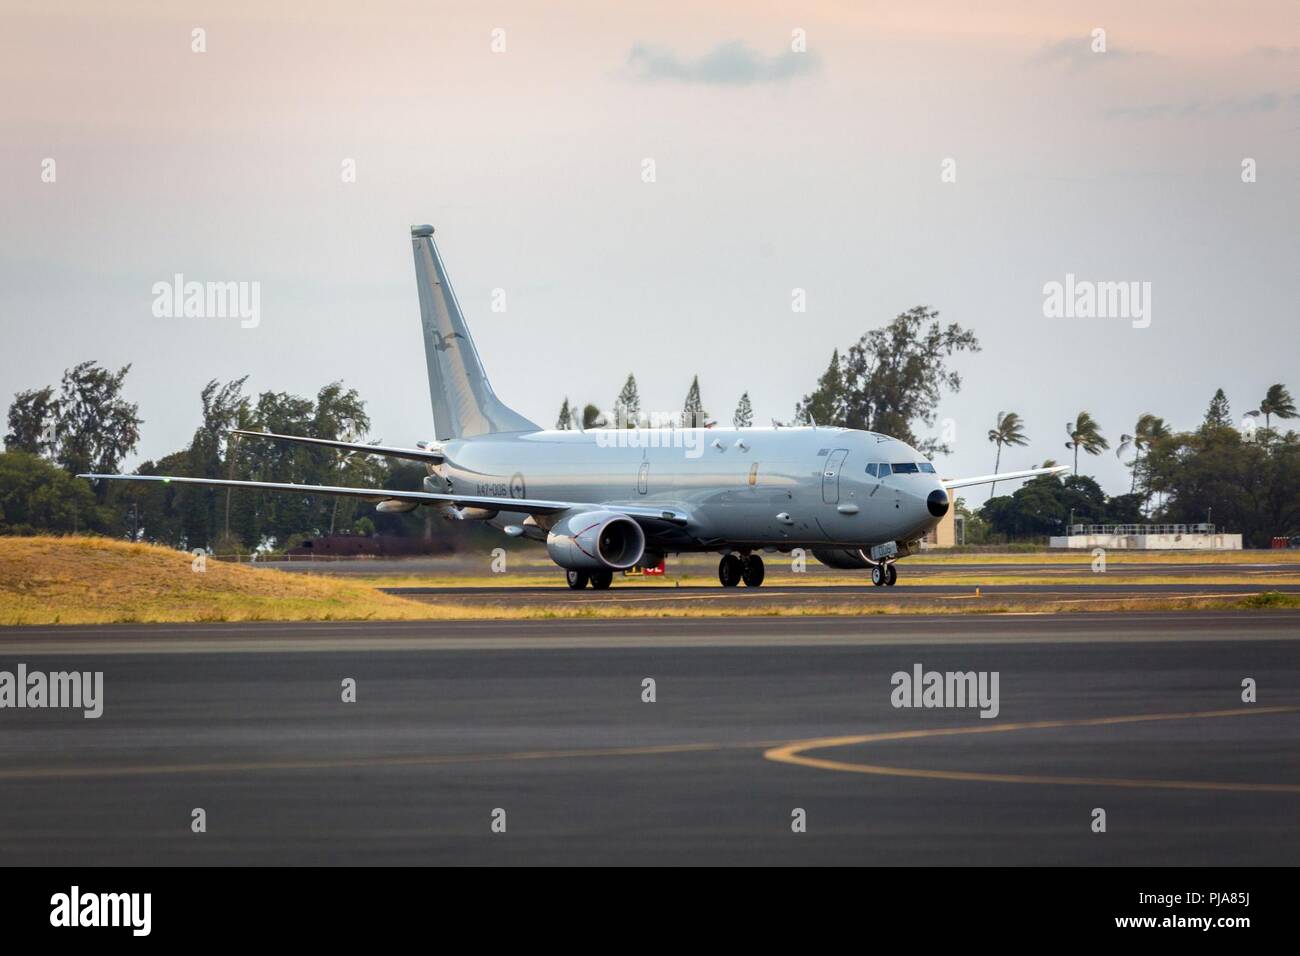 Pearl Harbor (July 3, 2018) A Royal Australian Air Force P-8A Poseidon aircraft taxis in to Joint Base Pearl Harbor–Hickam during Exercise Rim of the Pacific (RIMPAC), July 3.  Twenty-five nations, 46 ships, five submarines, about 200 aircraft, and 25,000 personnel are participating in RIMPAC from June 27 to Aug. 2 in and around the Hawaiian Islands and Southern California. The world’s largest international maritime exercise, RIMPAC provides a unique training opportunity while fostering and sustaining cooperative relationships among participants critical to ensuring the safety of sea lanes and Stock Photo